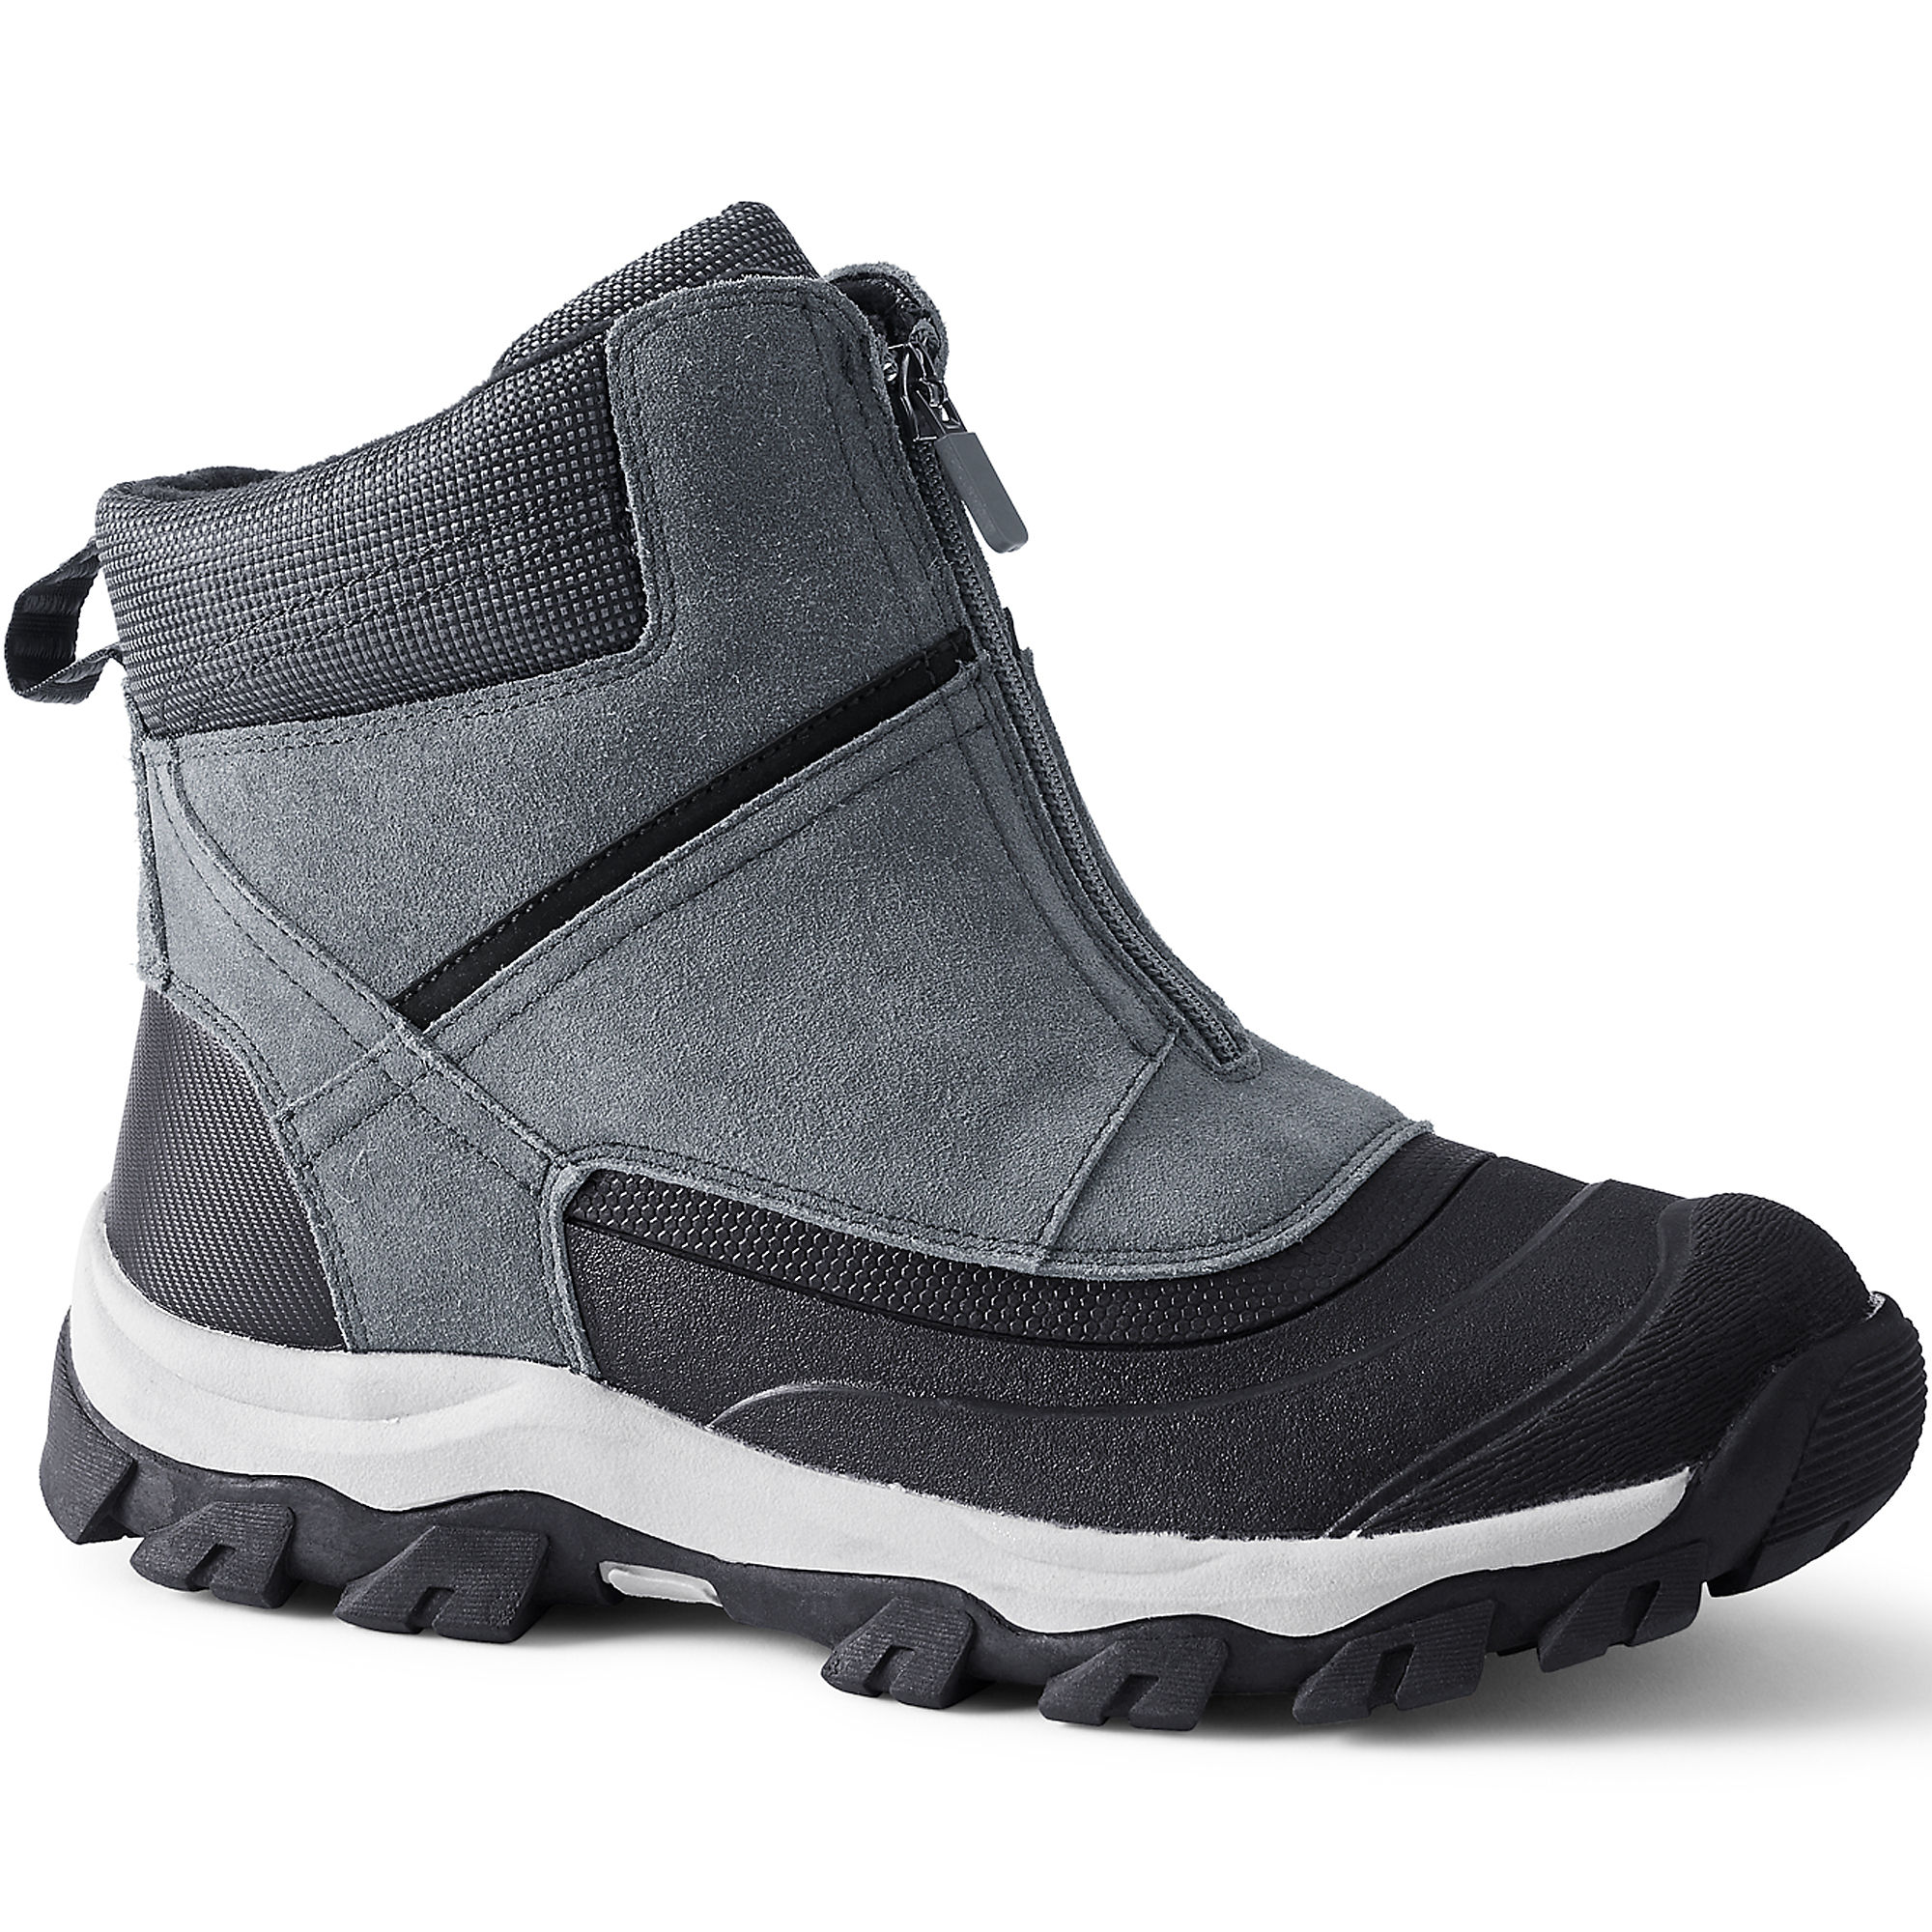 Lands End Men's Squall Zip Insulated Winter Snow Boots (Pewter, various sizes)